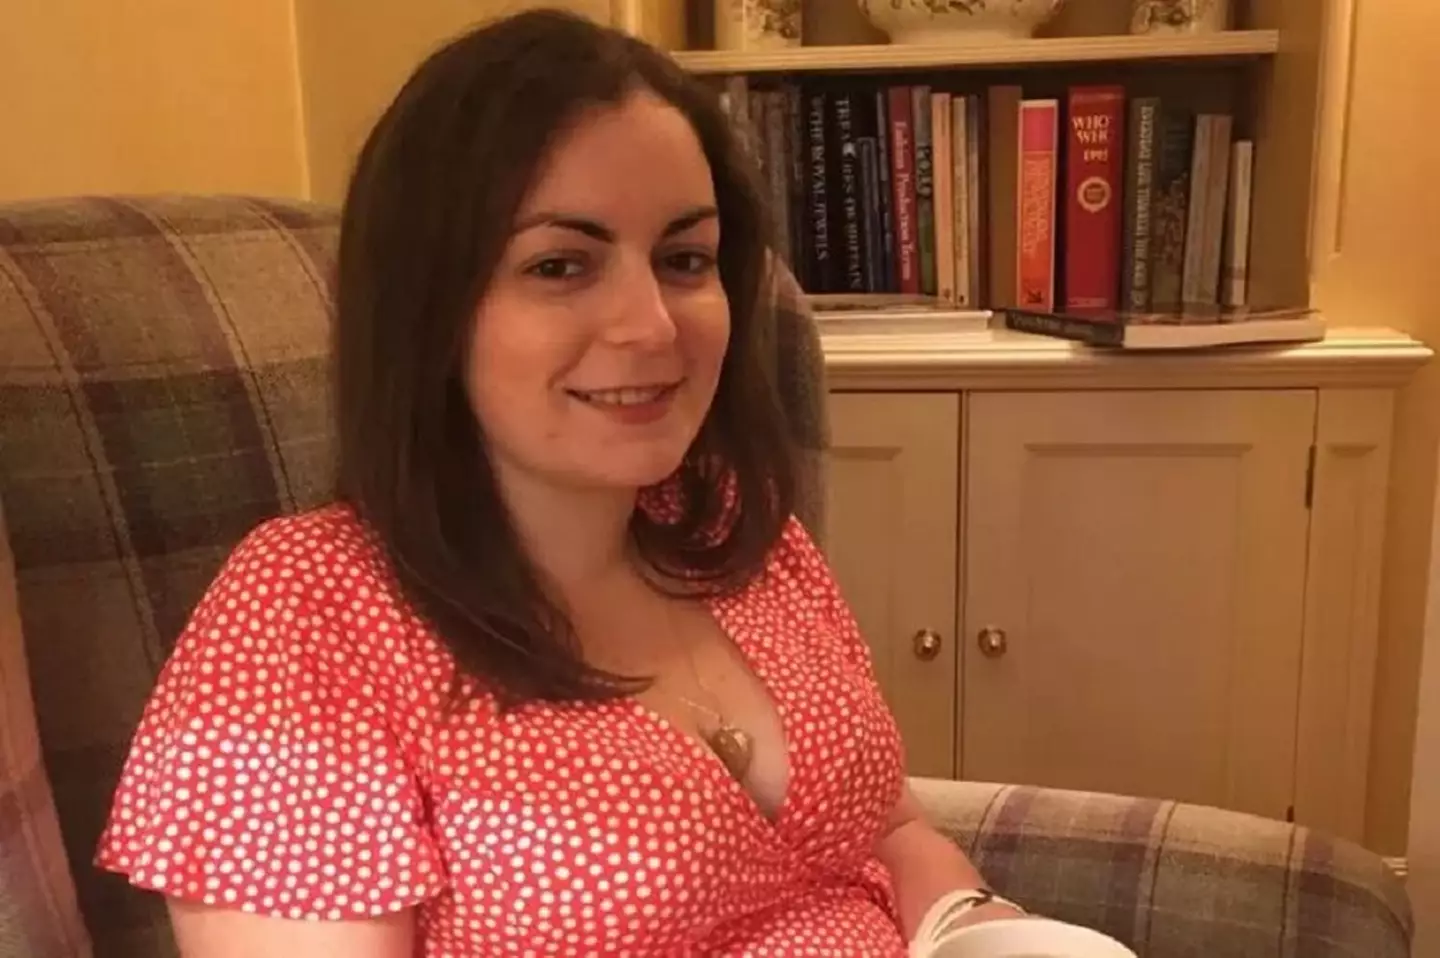 Bernadette Horsey suffered a cardiac arrest and died just seconds after seeing her newborn son for the first time.